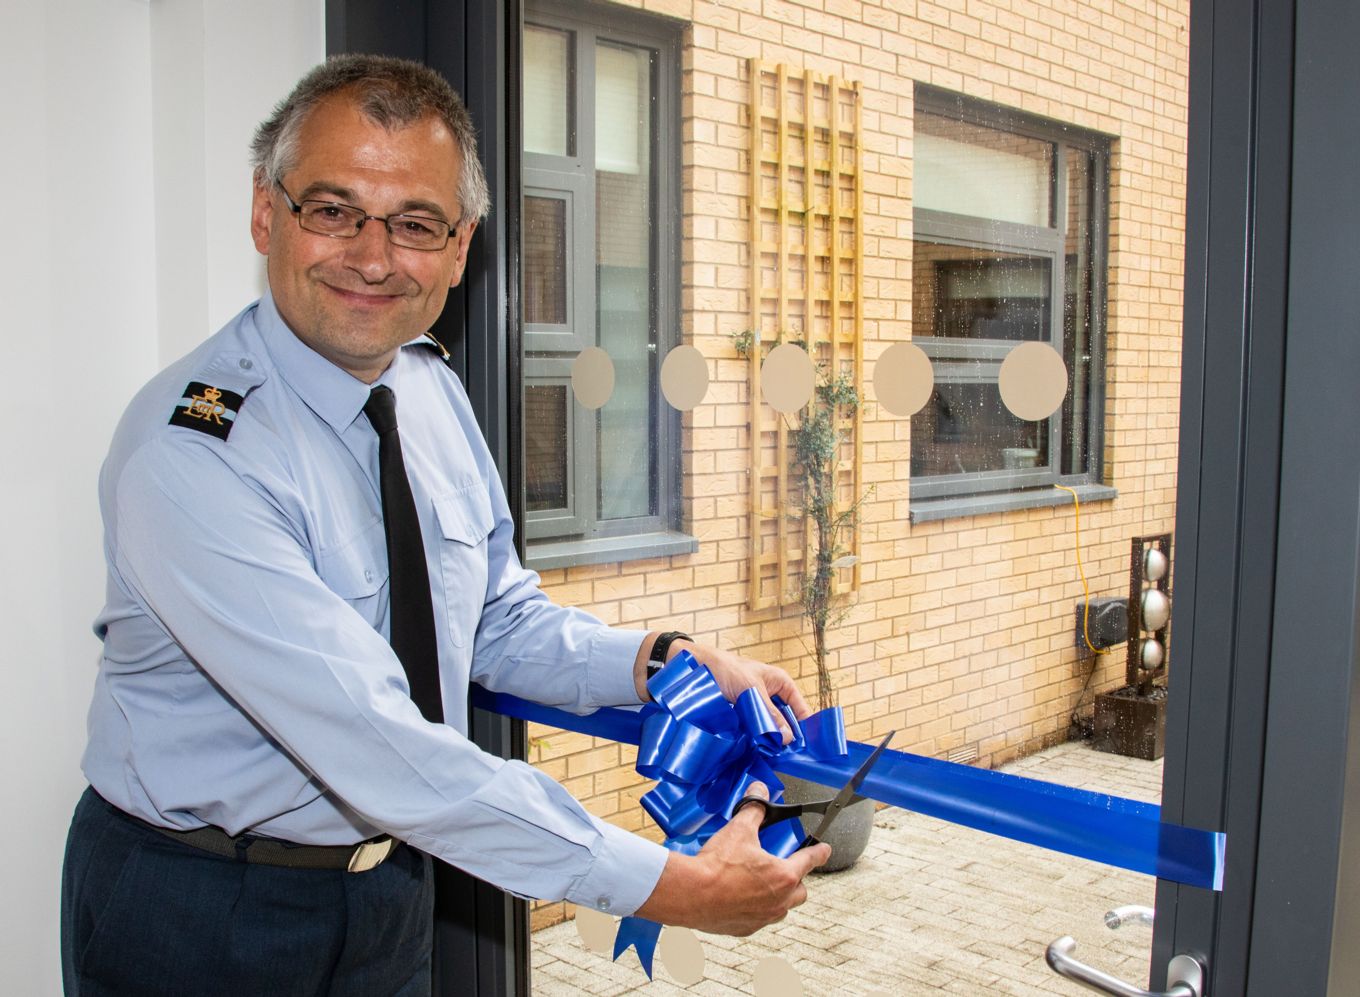 A ribbon cutting ceremony lead by Air Officer Medical and Head of the RAF Medical Service, Air Commodore Dave McLoughlin marked the official opening of the garden